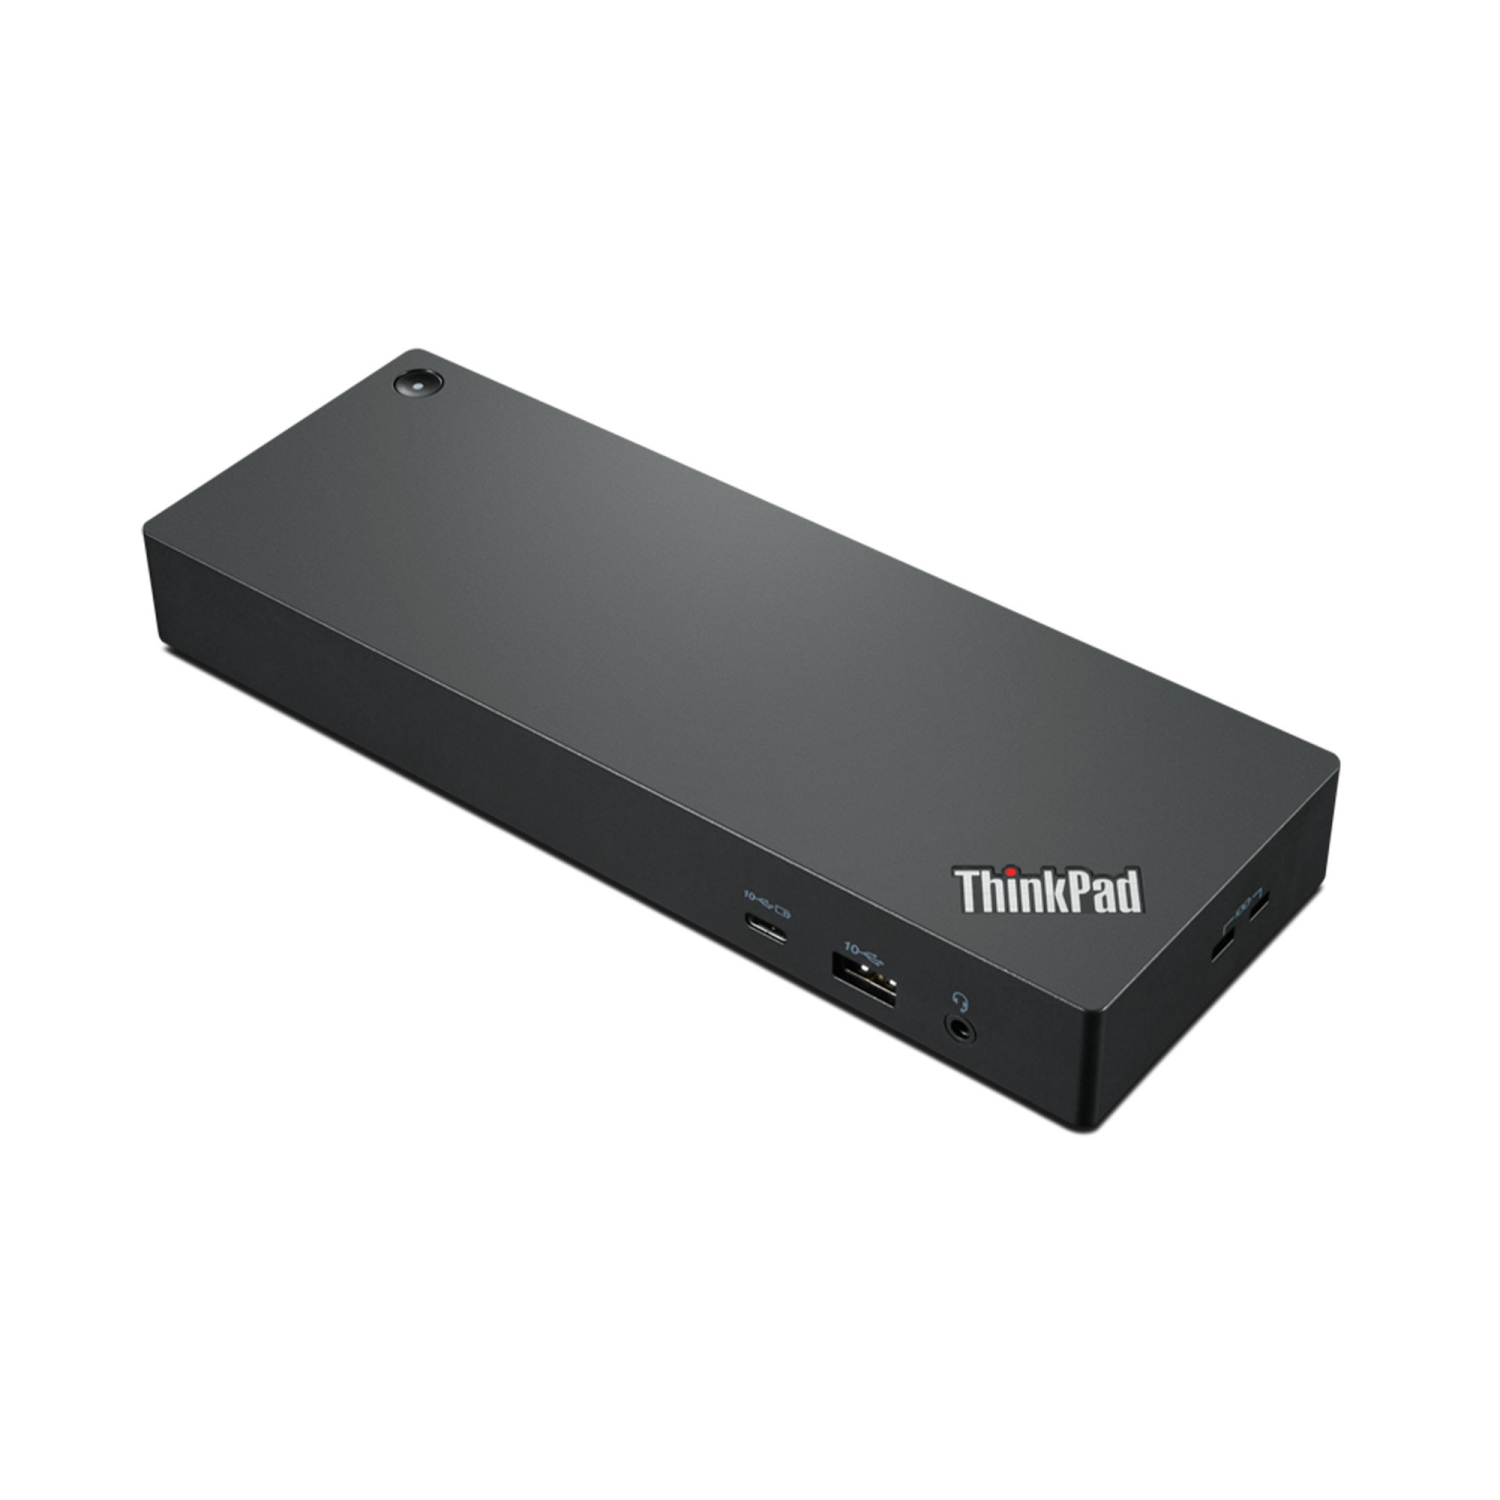 Lenovo ThinkPad Universal Thunderbolt 4 Dock - US - 8K Display Support Up to 100W Power Delivery